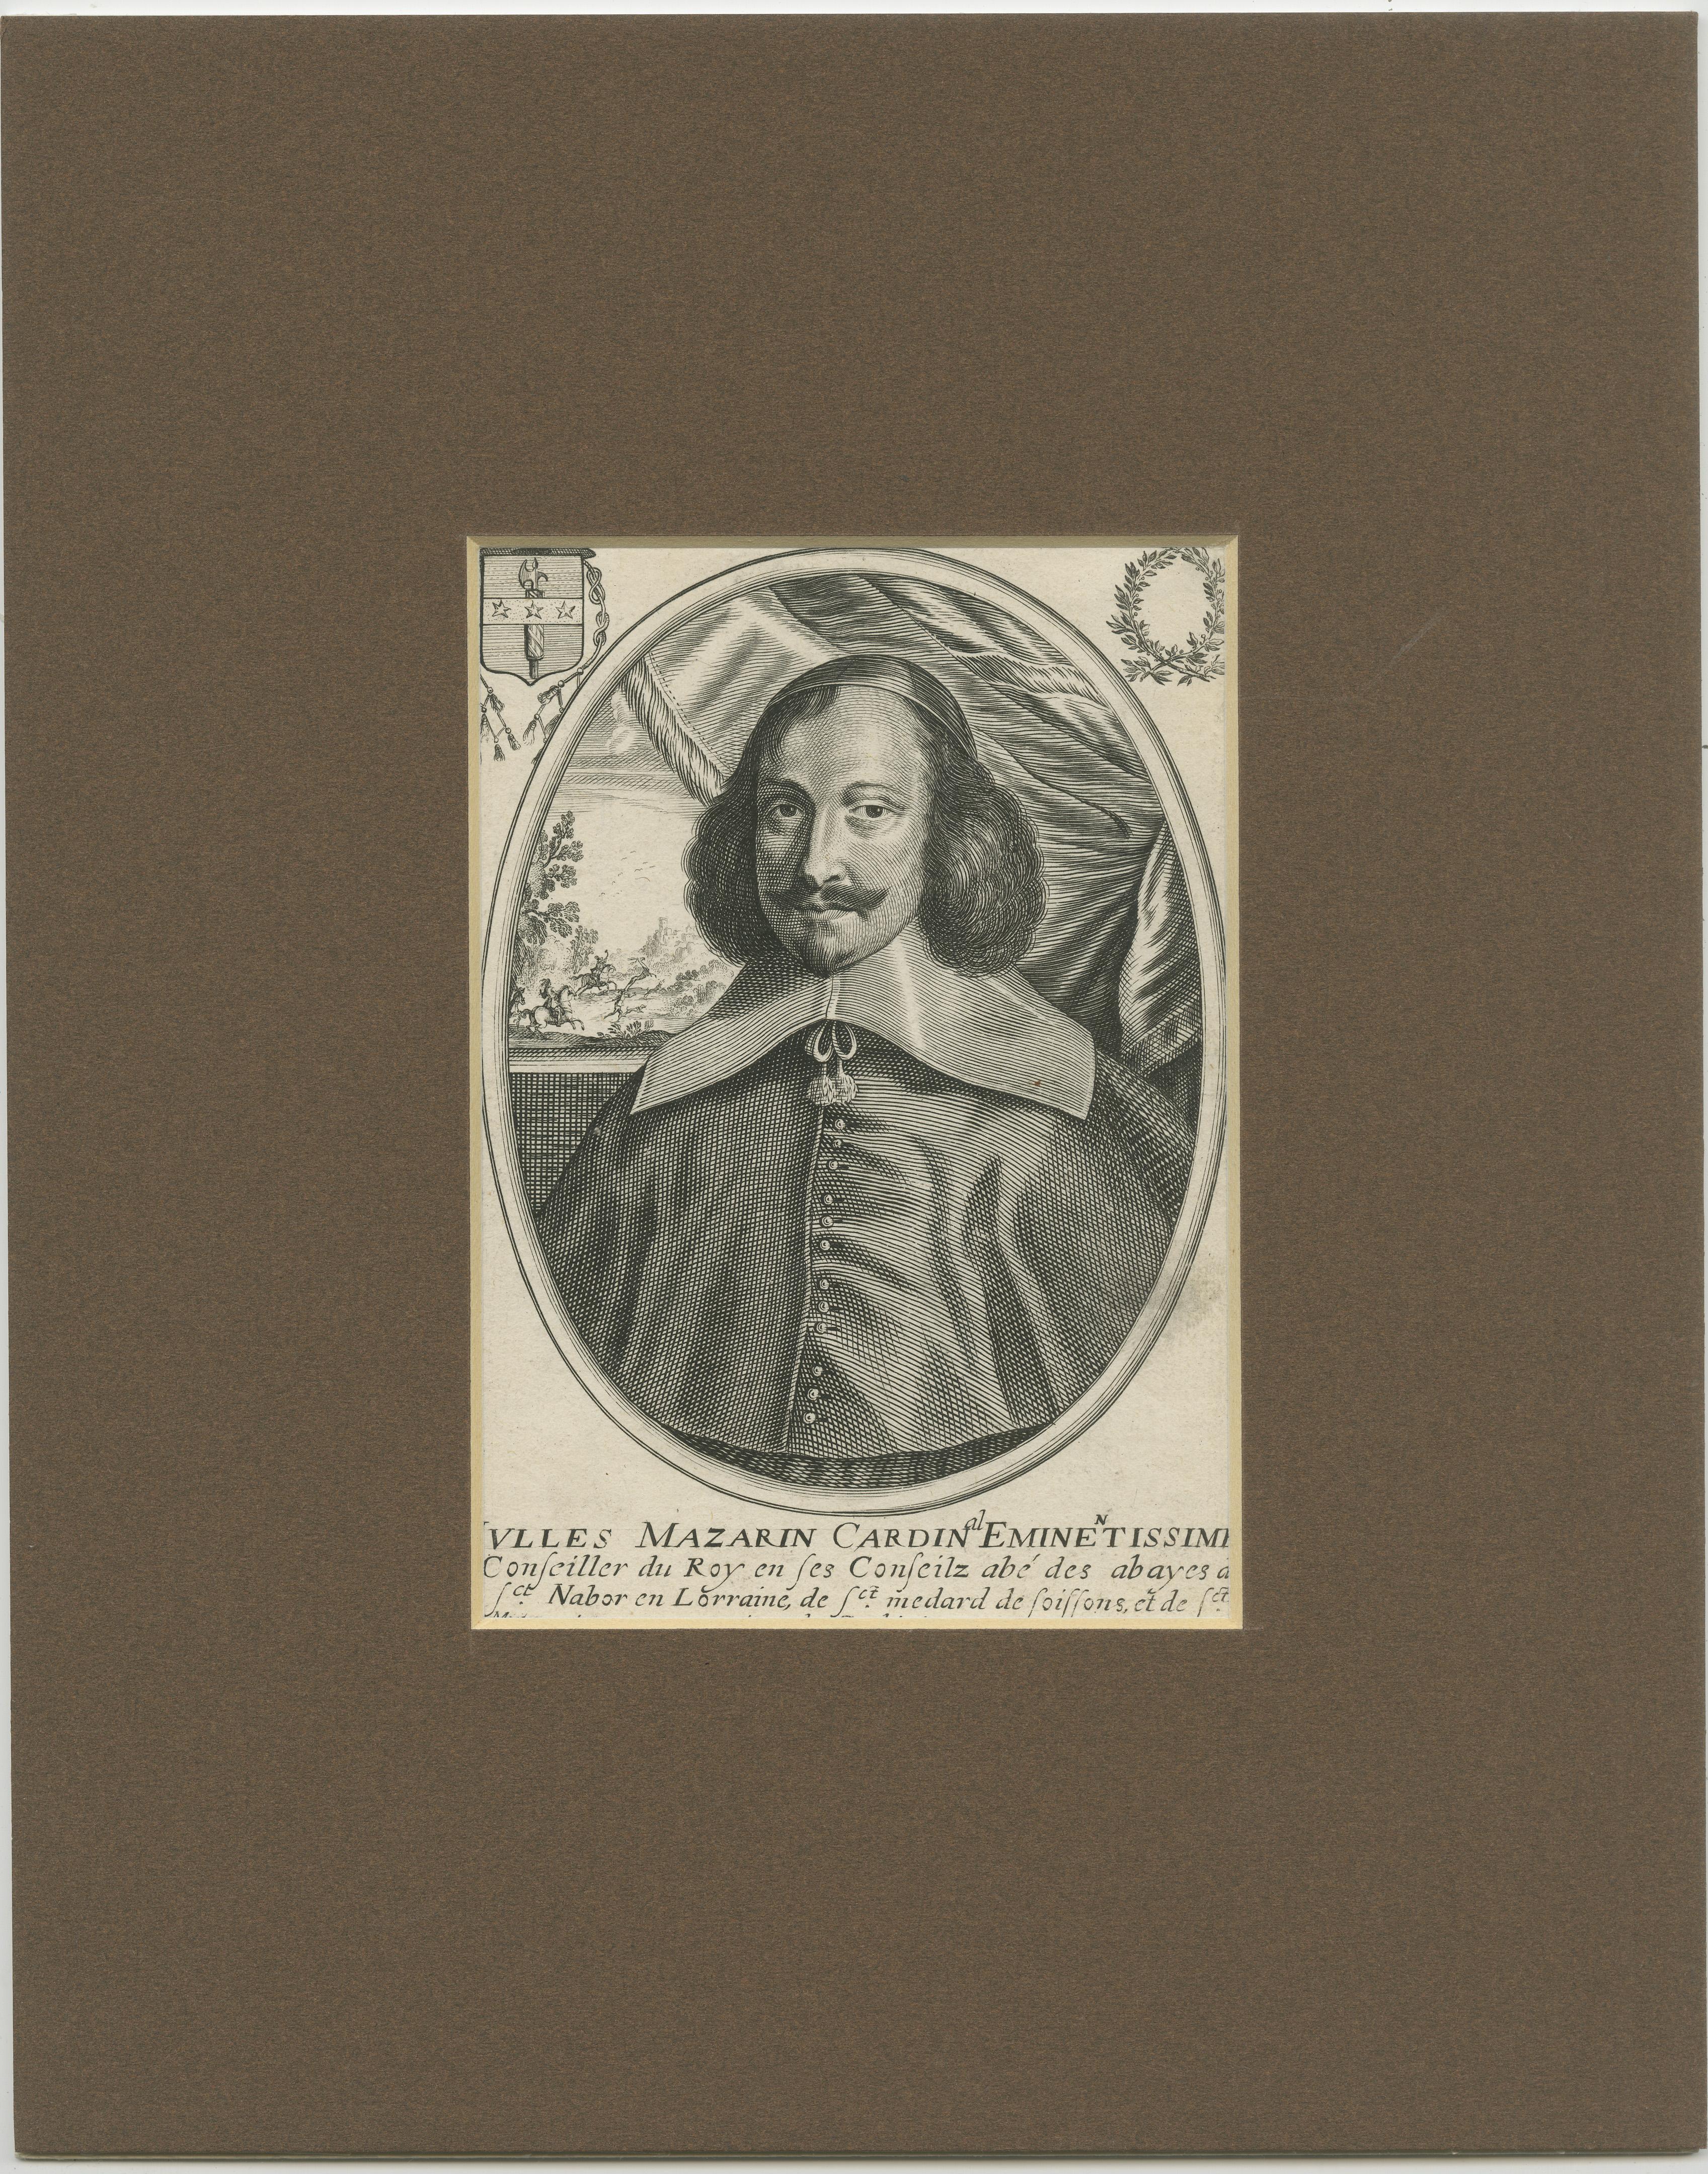 Antique print titled 'Iulles Mazarin Cardinal (..)'. Portrait of Jules Cardinal Mazarin, half-length directed to left looking to front, in oval. With coat of arms in the upper left corner and wreath in the upper right.

Published by Balthasar